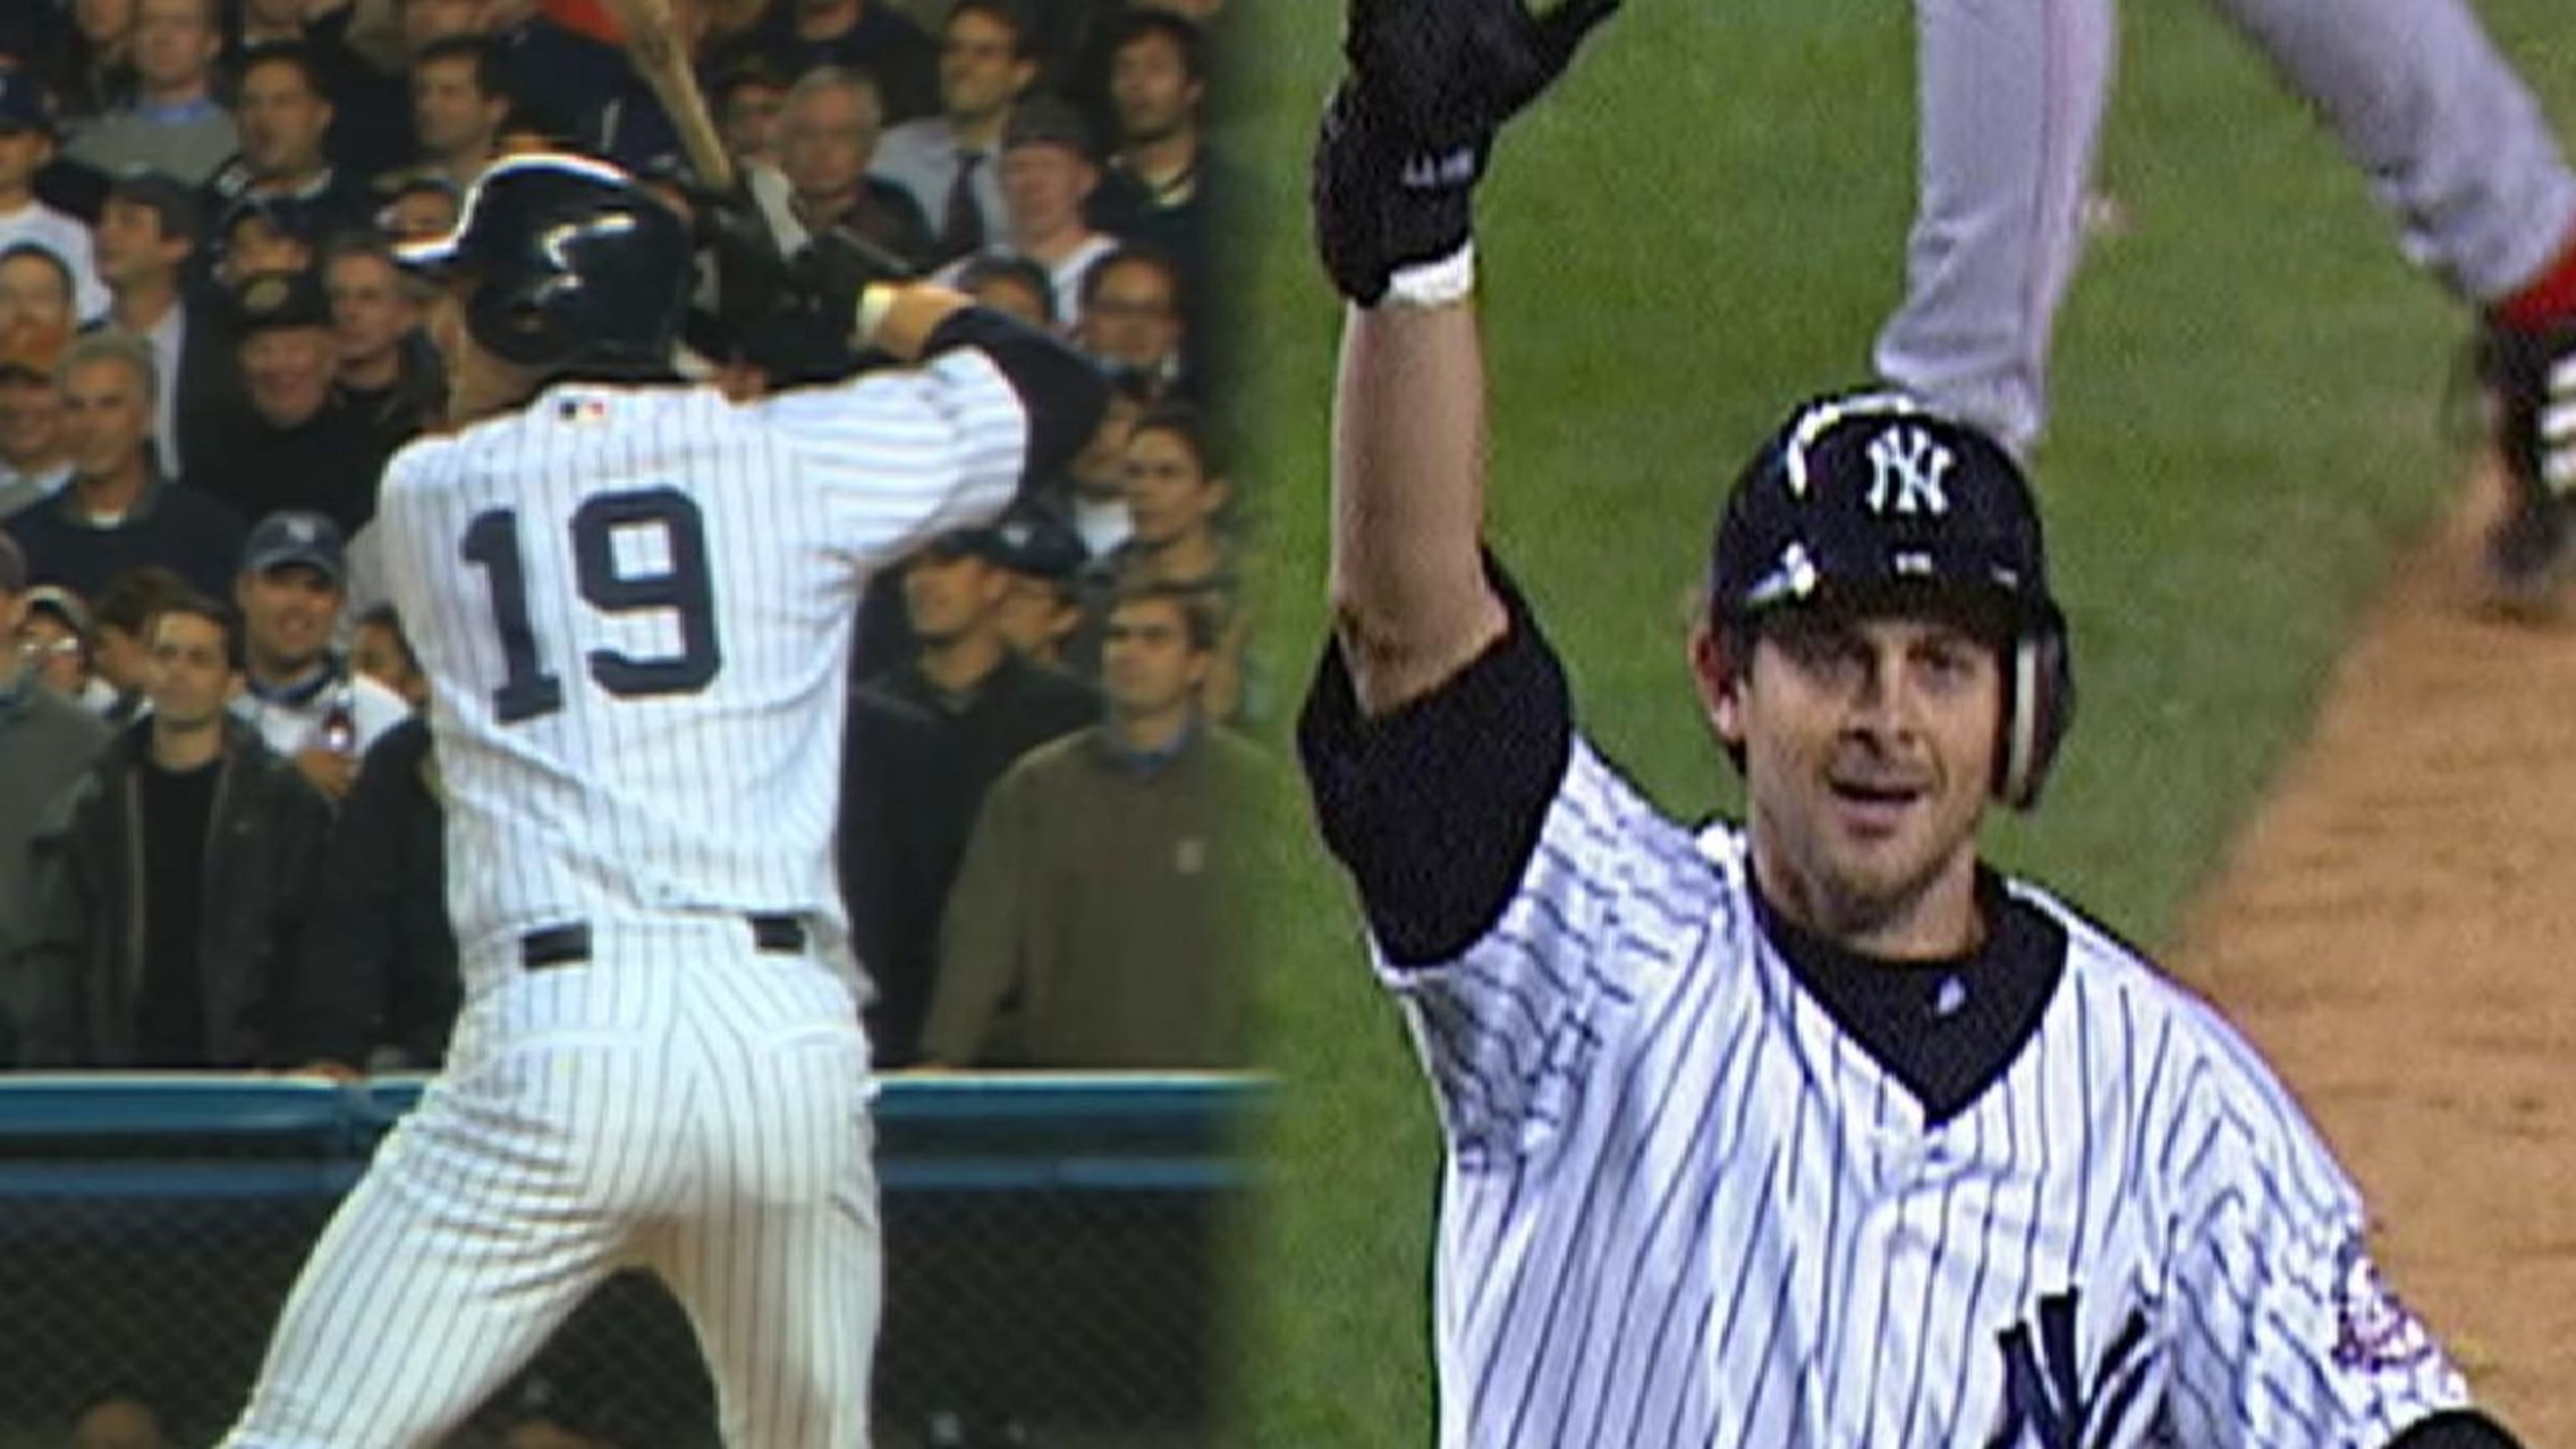 Will Aaron Boone Get Fired? Who Did Aaron Boone Play For? - News